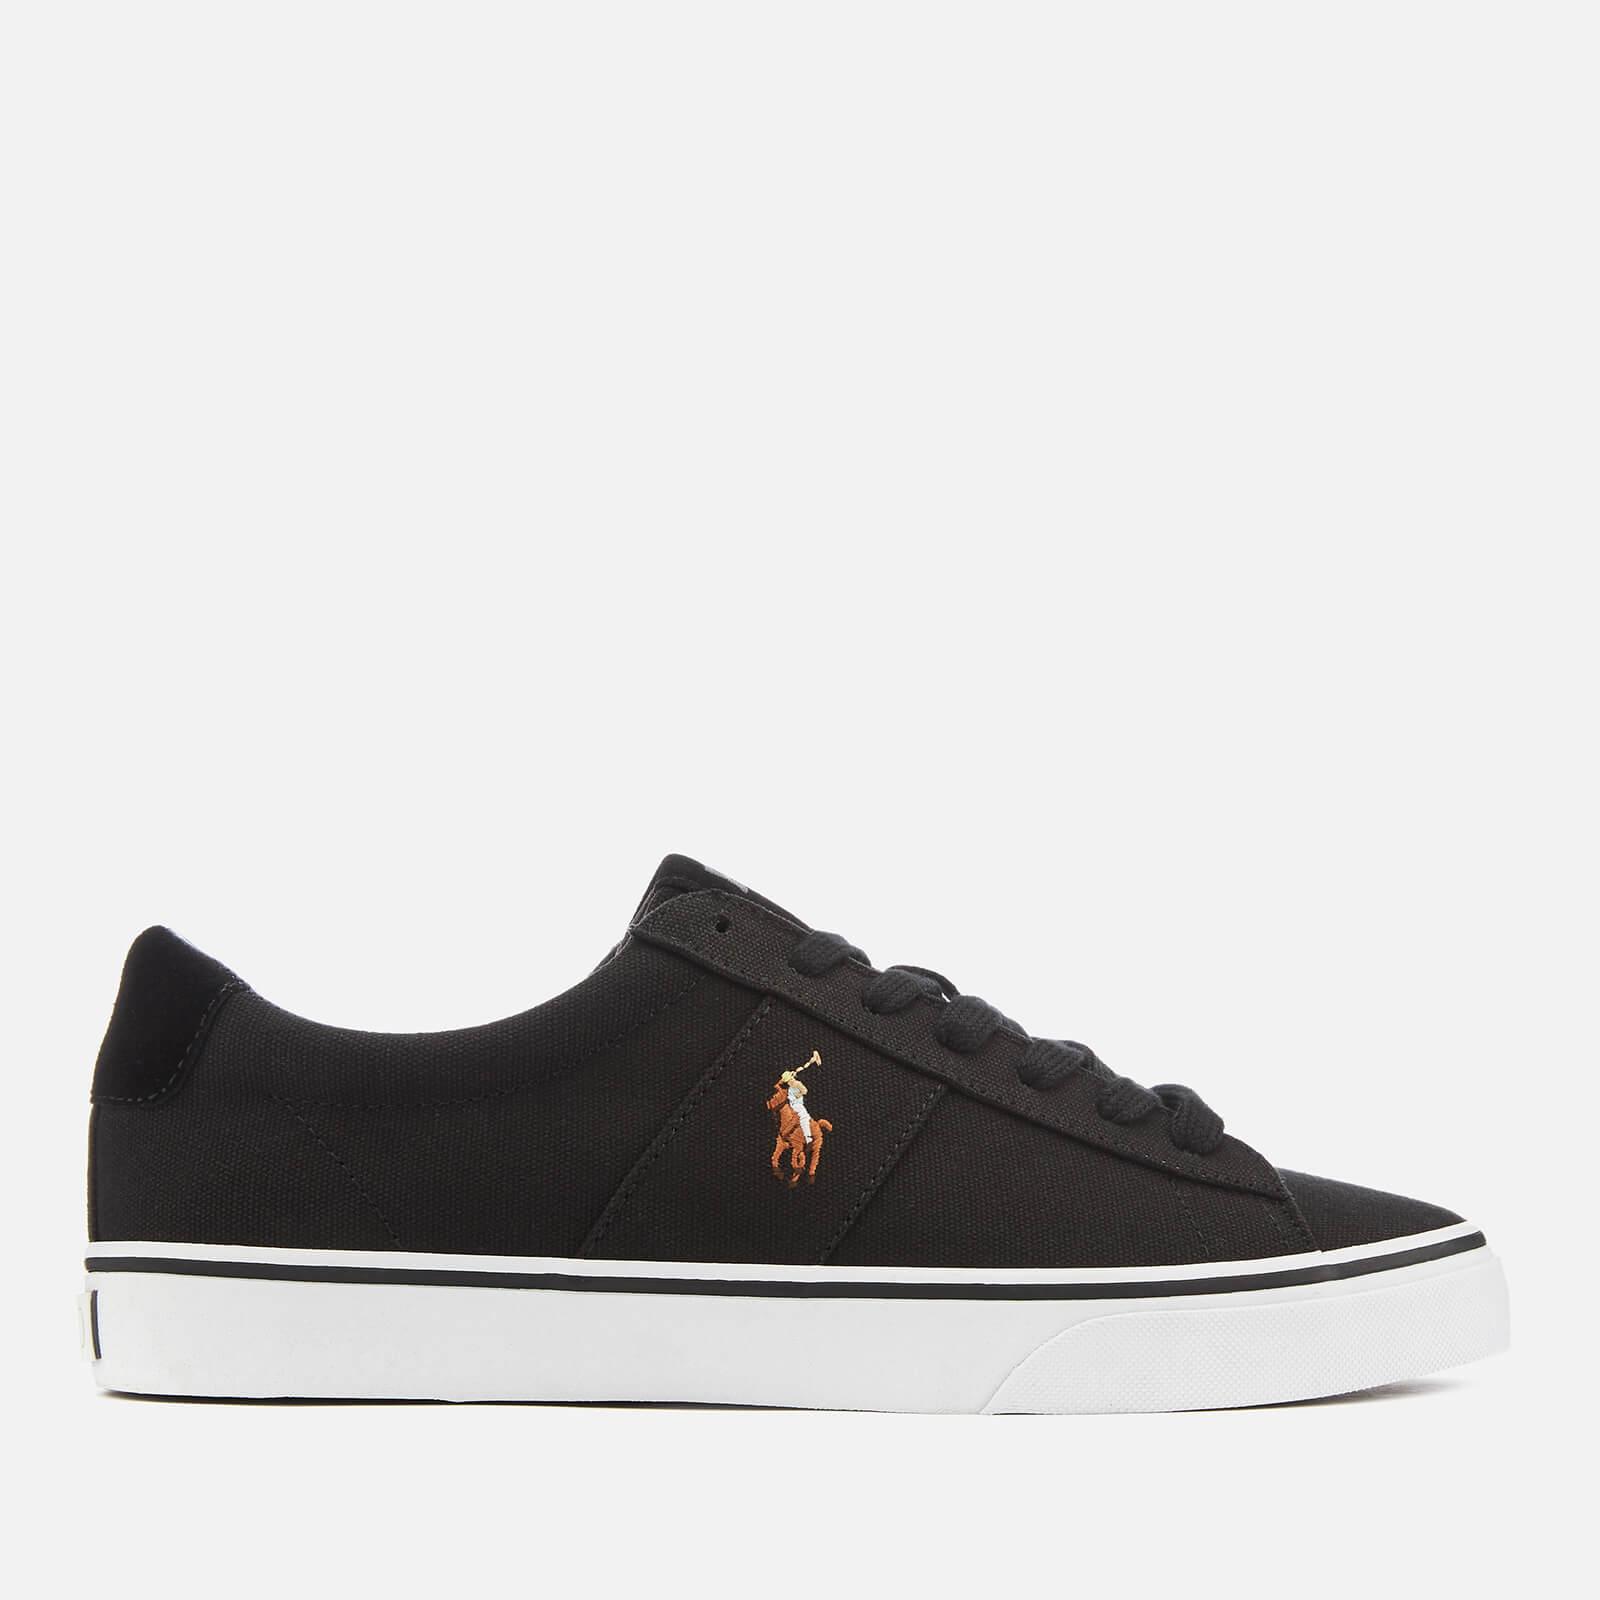 Polo Ralph Lauren Canvas Trainers in Black for Men - Lyst